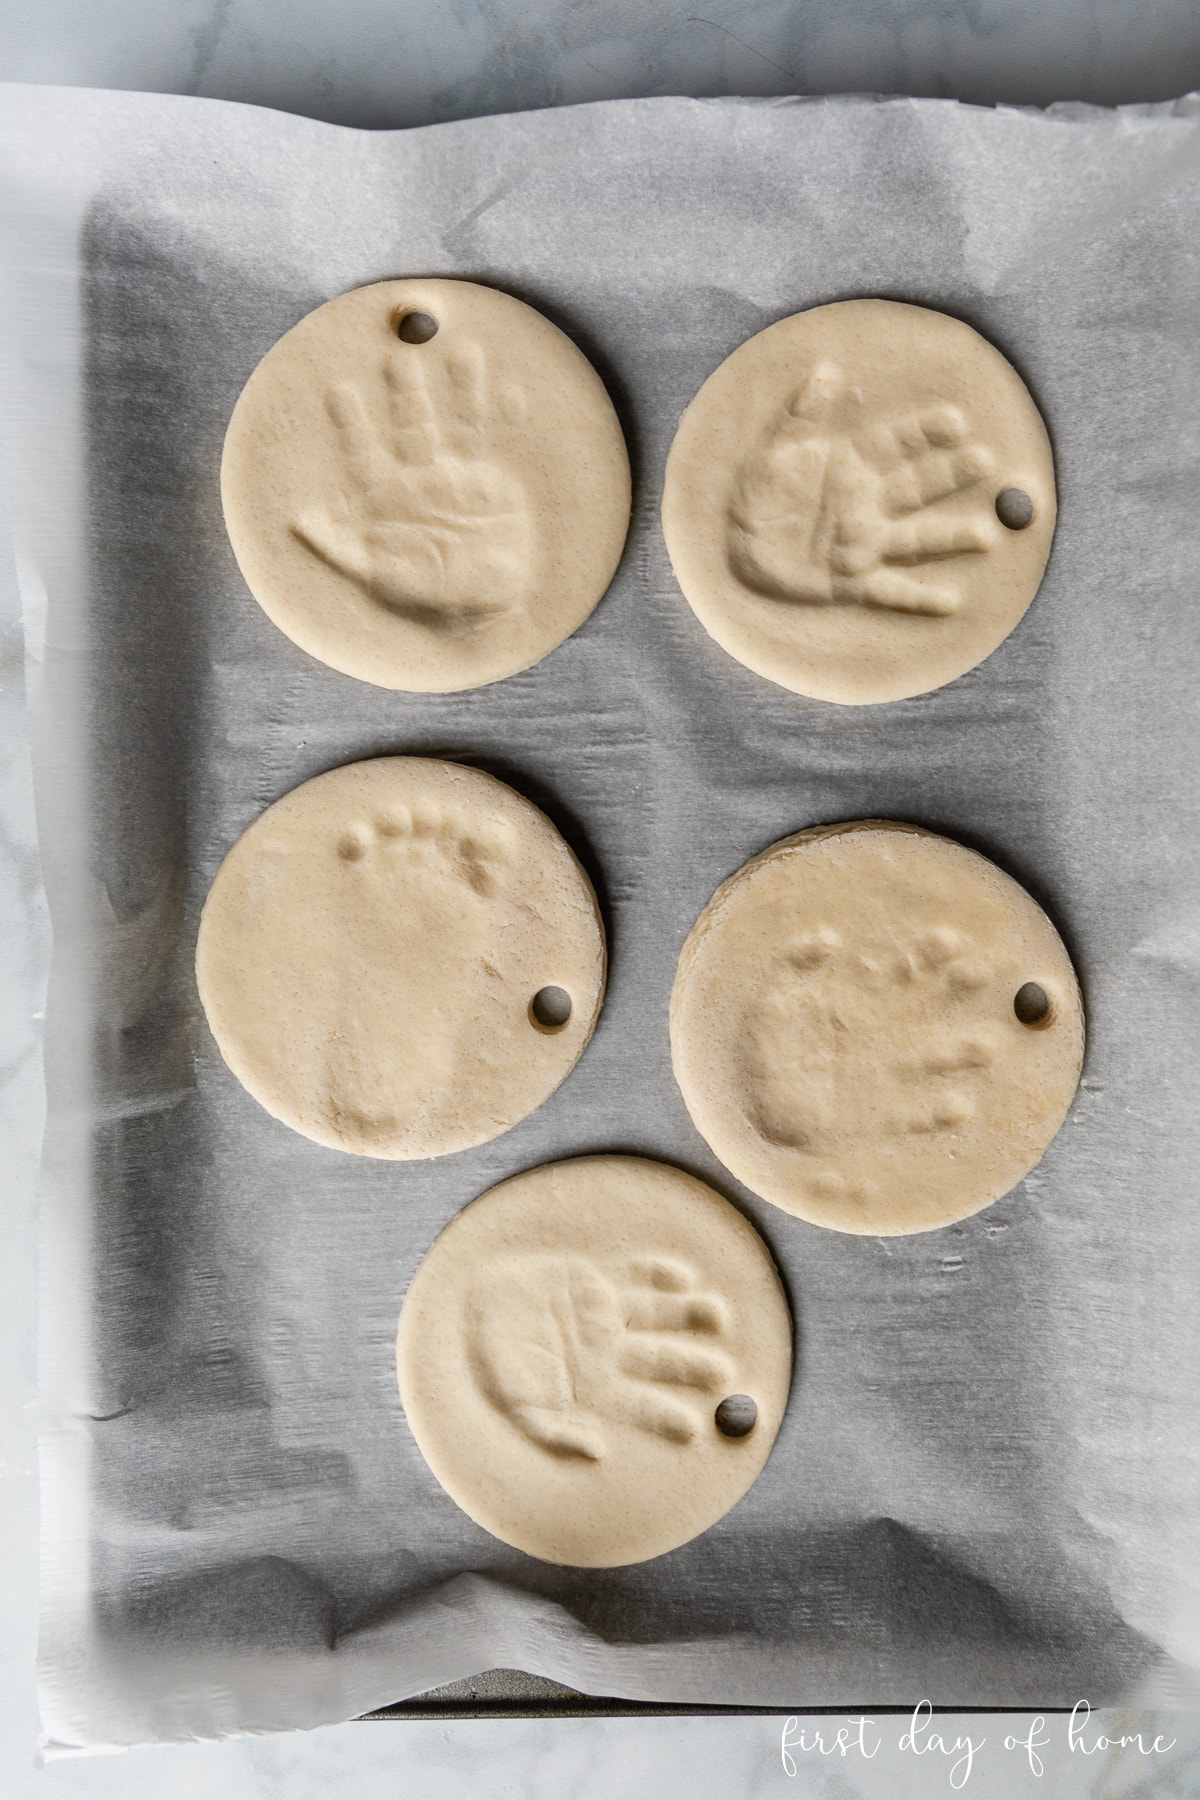 Handprints and footprints made into circular ornaments sitting on cookie sheet.